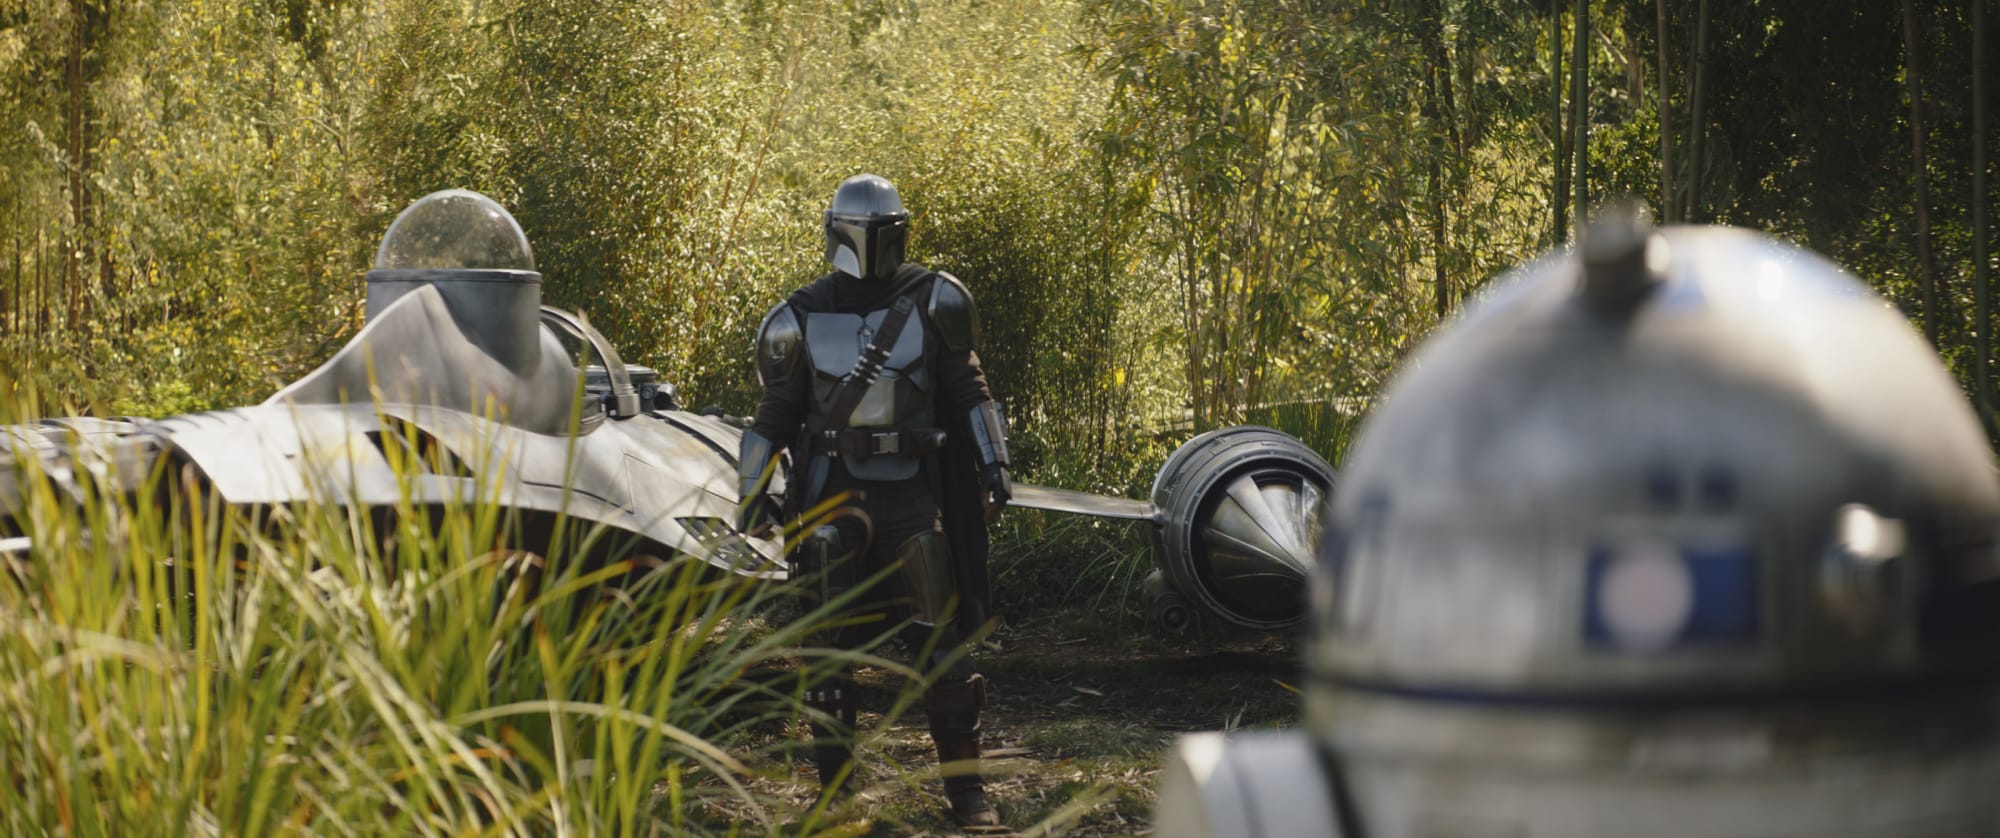 Does The Mandalorian Season 3 have an official release date?